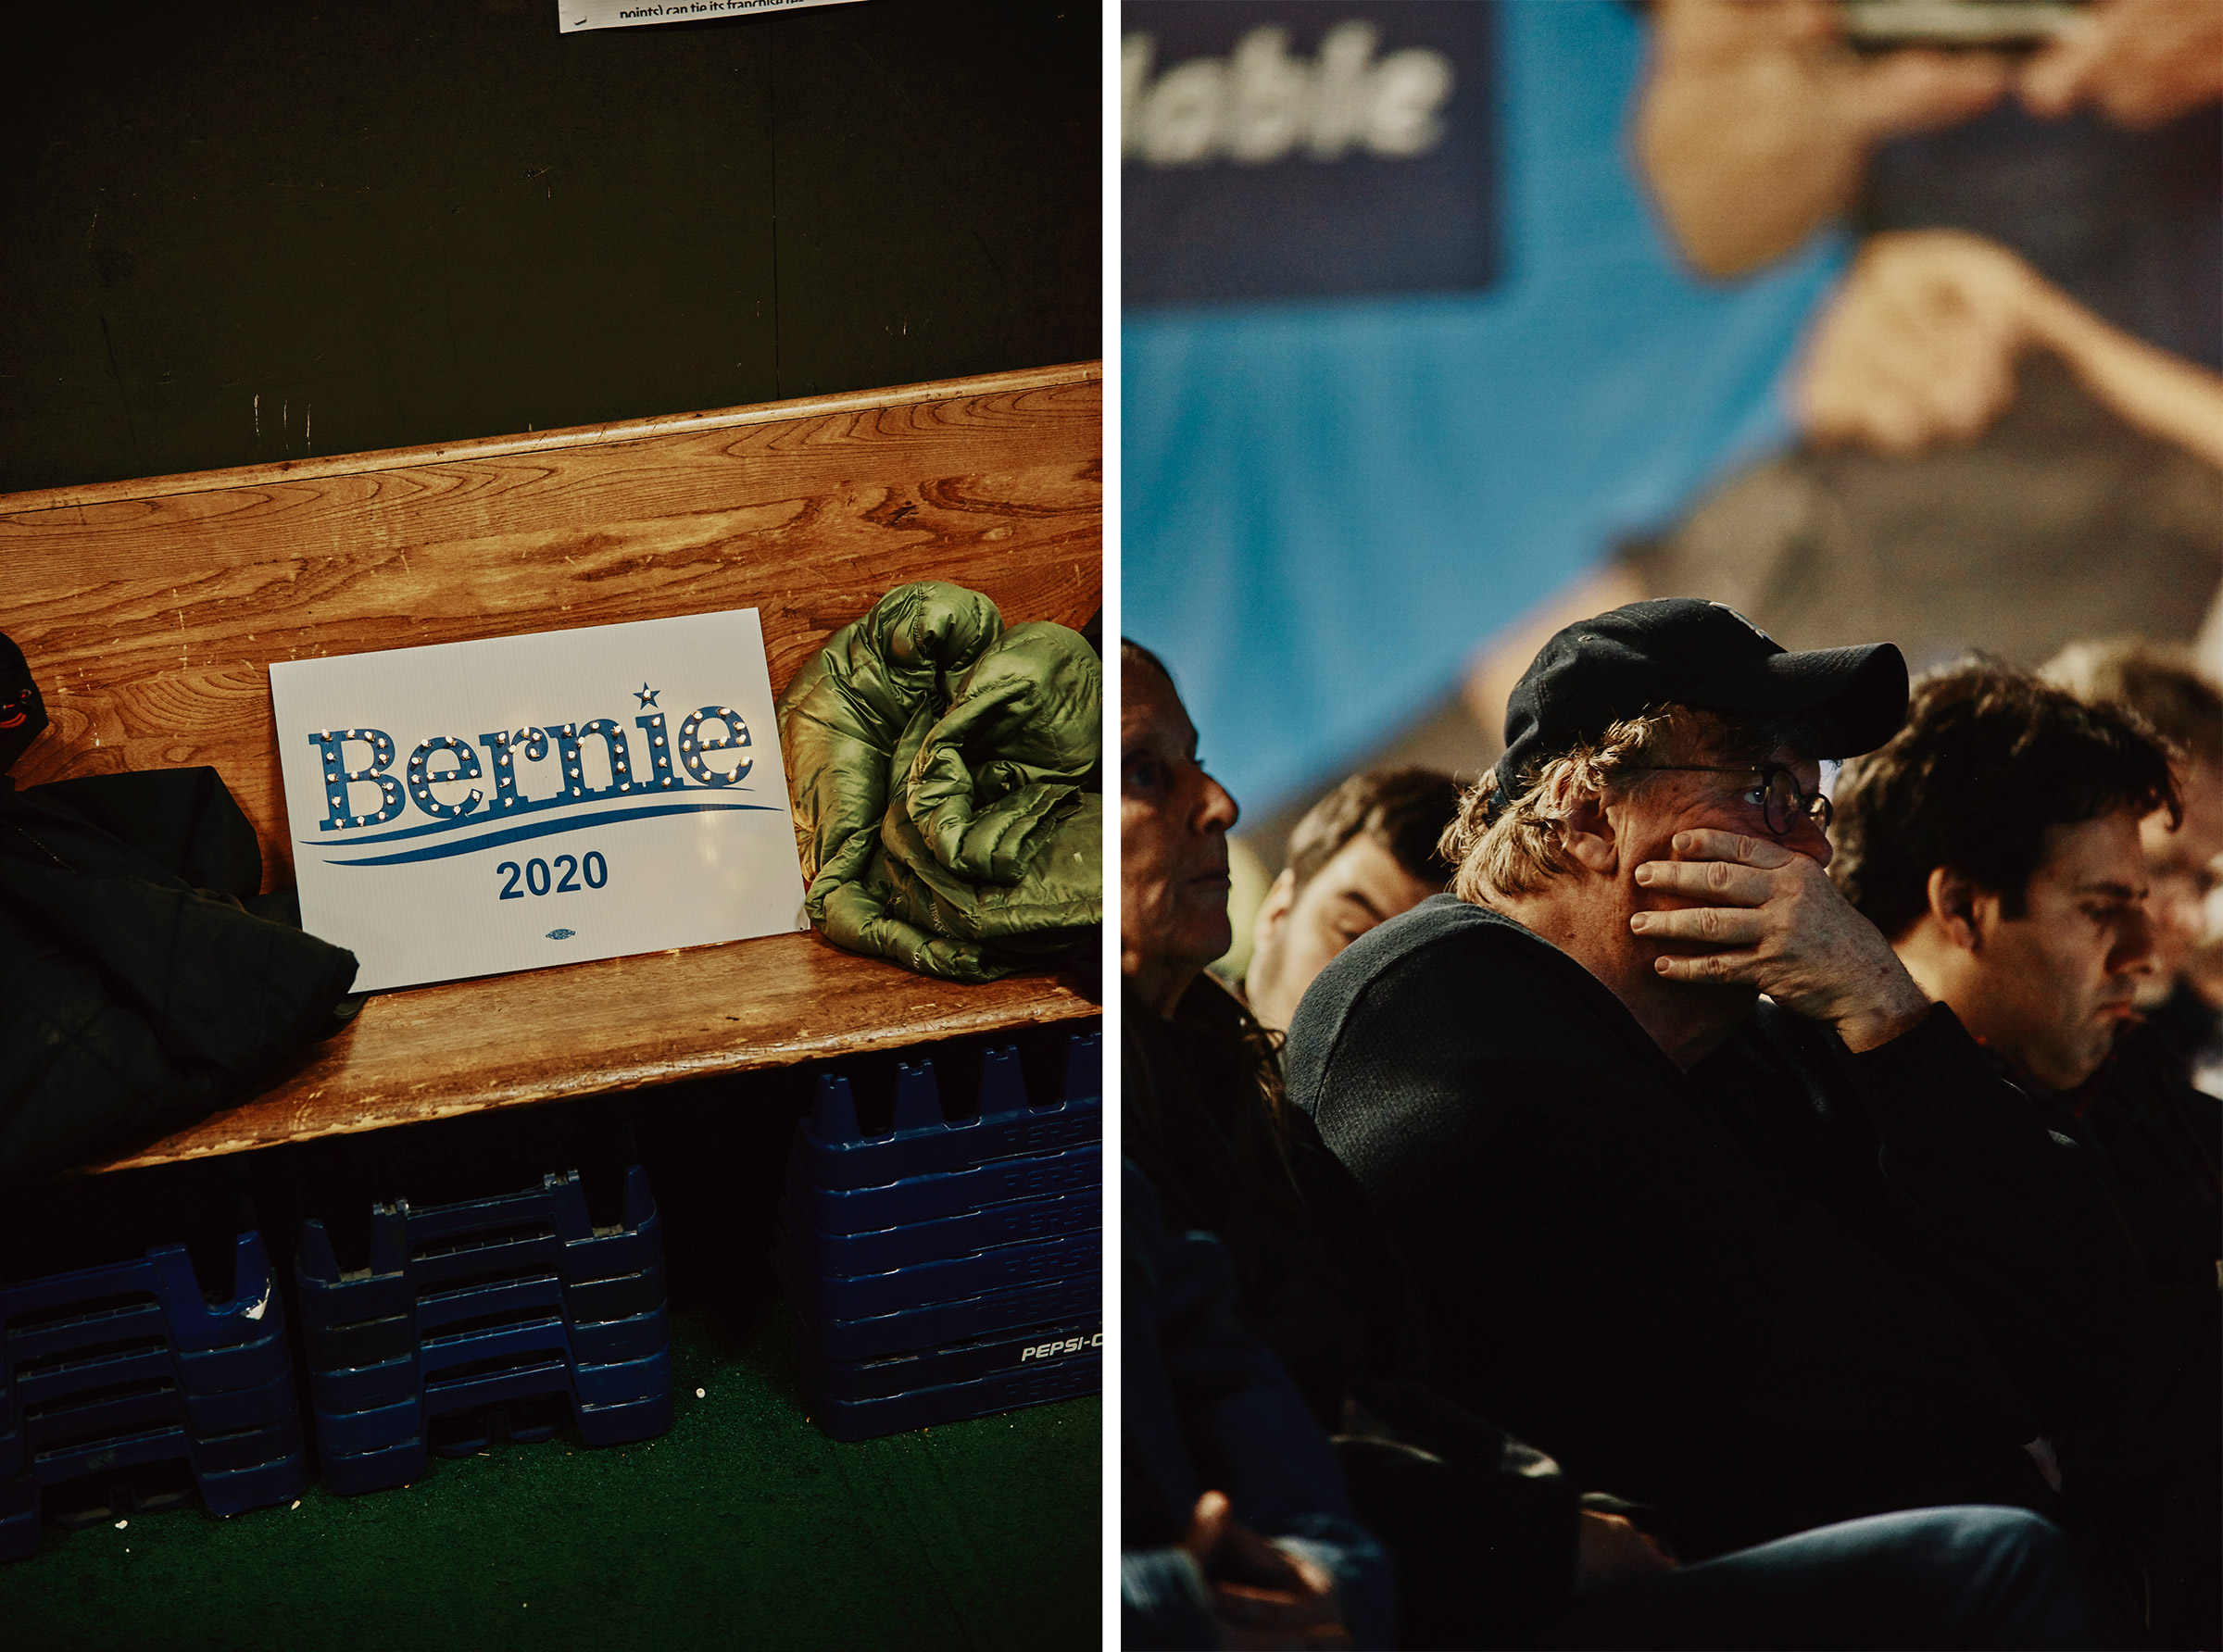 Manchester, New Hampshire - February 7, 2020: The Bernie Sanders 2020 Debate Watch Party at the Ultimate Sports Academy in Manchester, New Hampshire. Credit: Tony Luong for Time